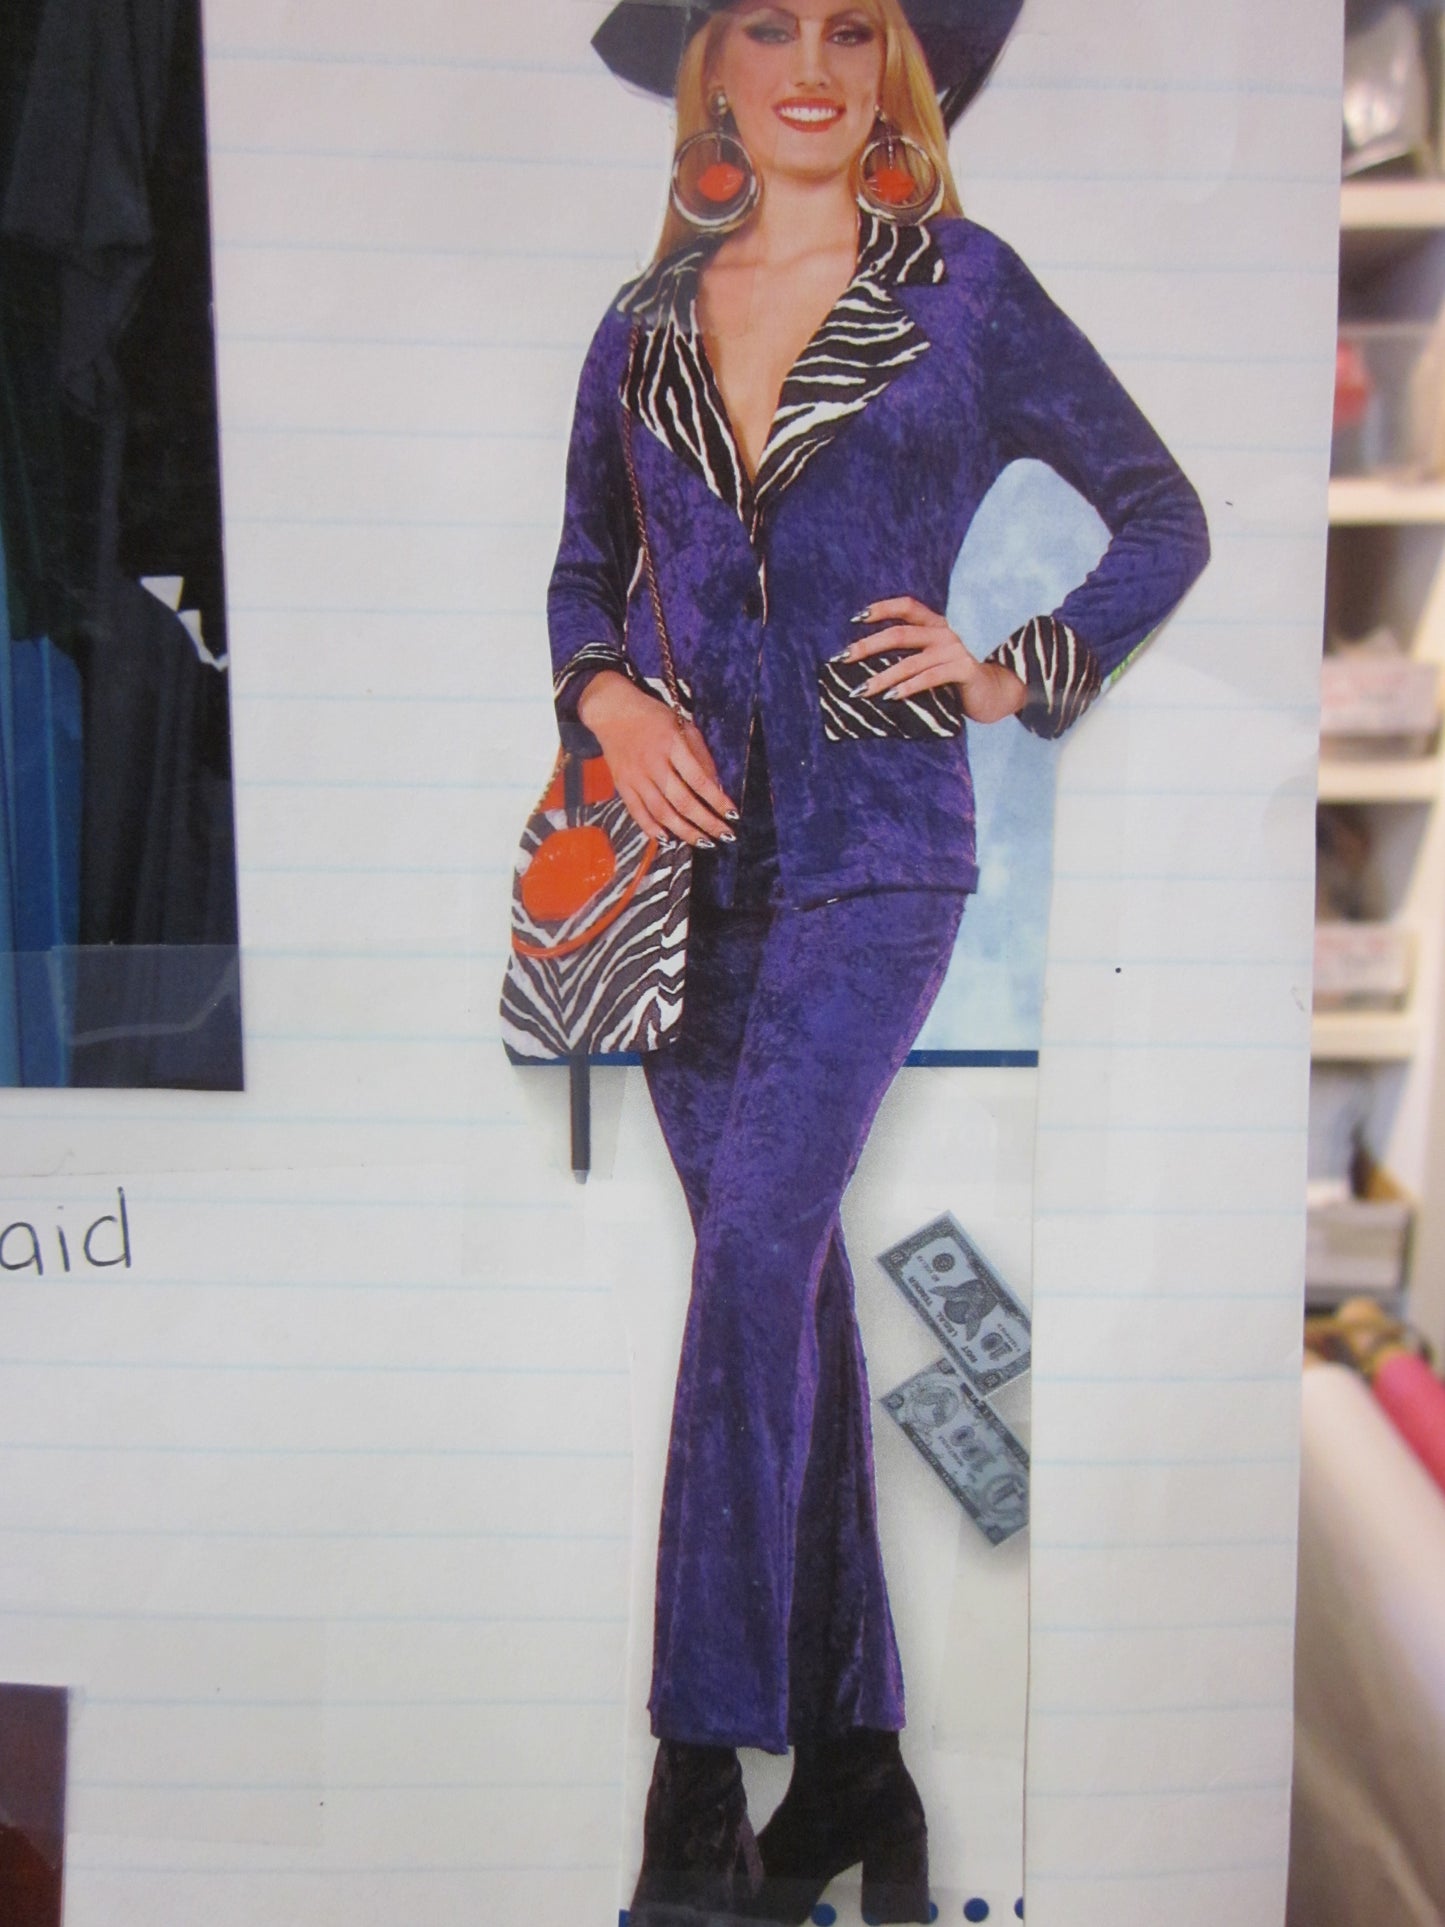 DOWNTOWN DIVA COSTUME #20 - MISS LESTER'S 